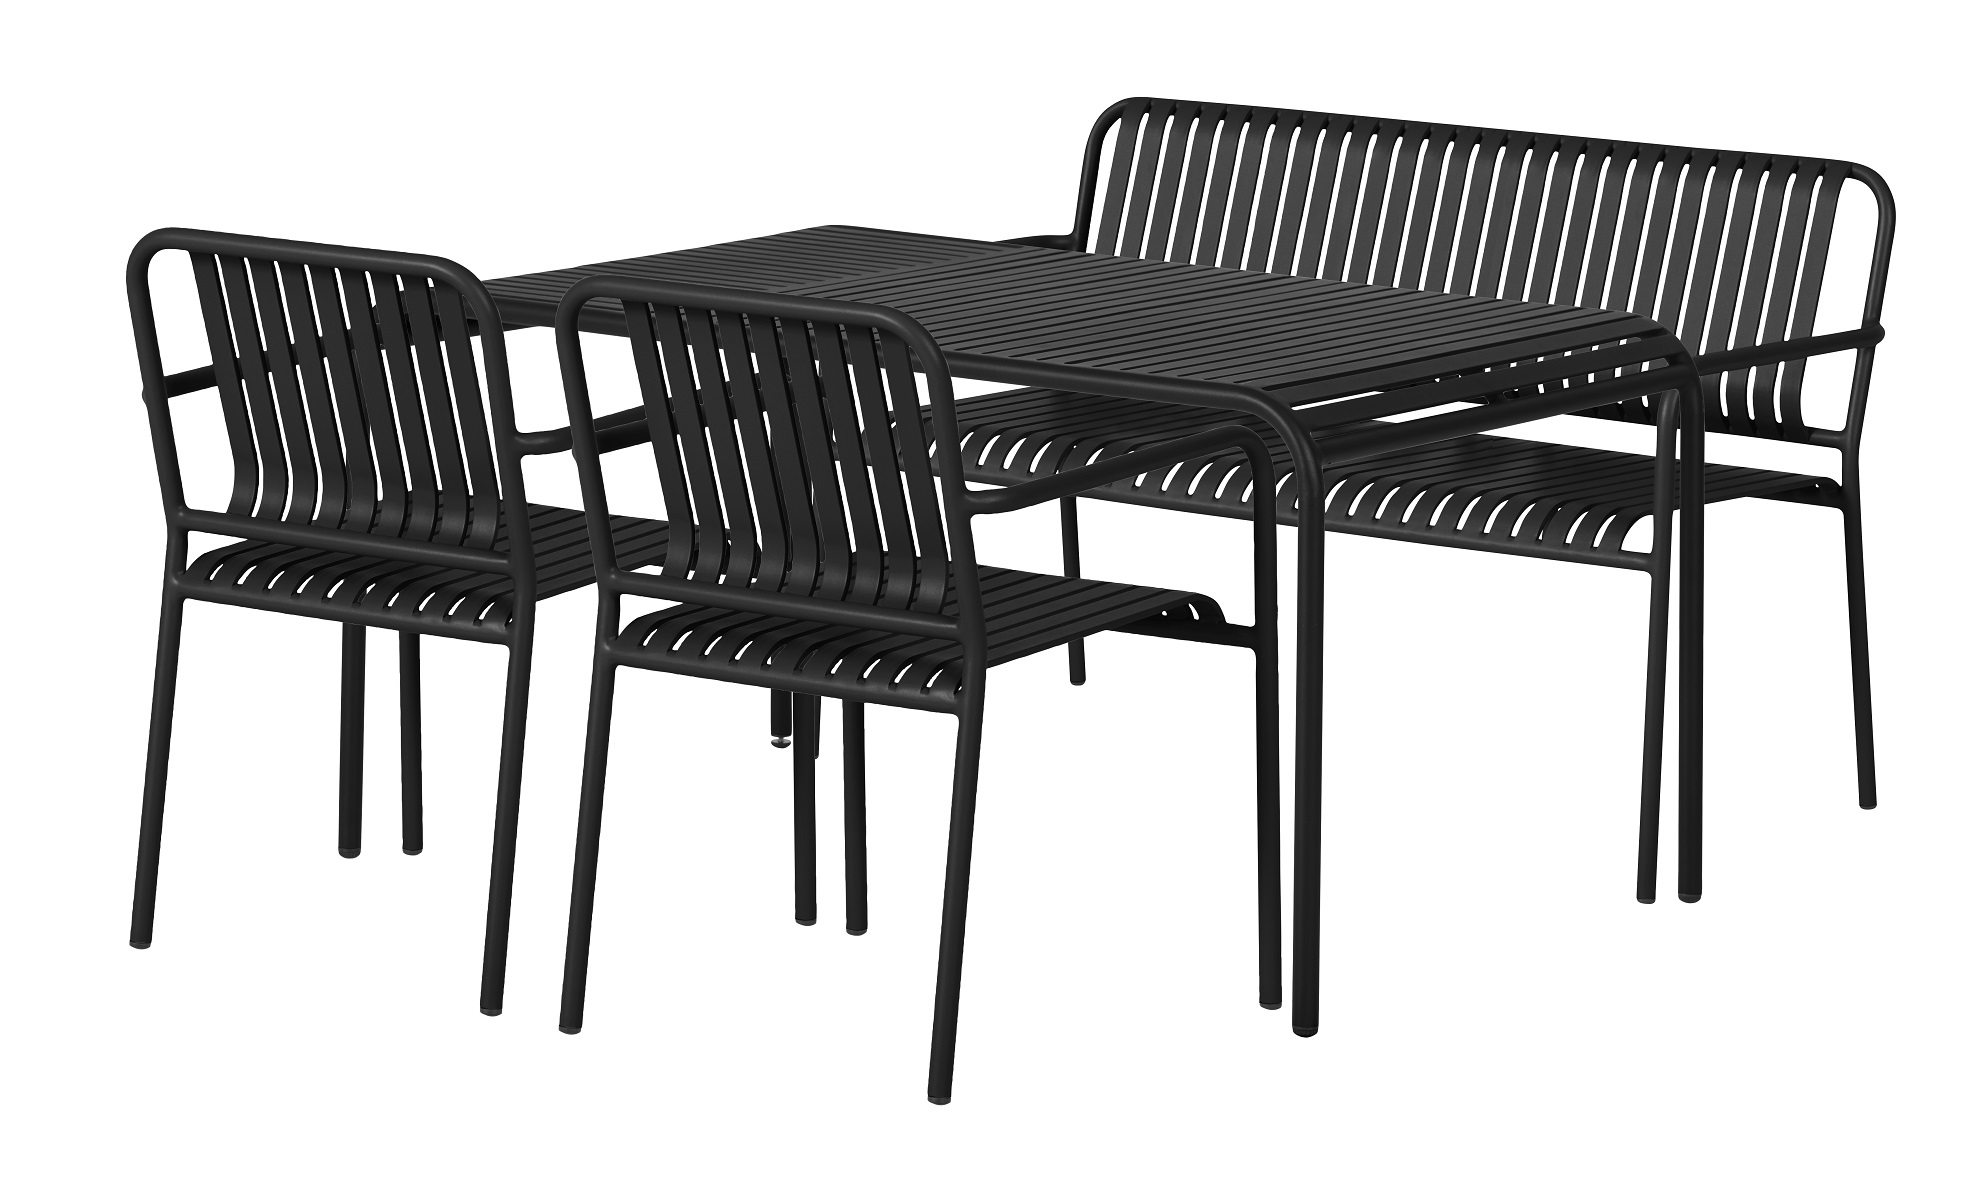 Living Outdoor - Stella Garden Table 150 x 90 cm with 2 pcs. Chairs and 1 pcs. Garden Bench - Black